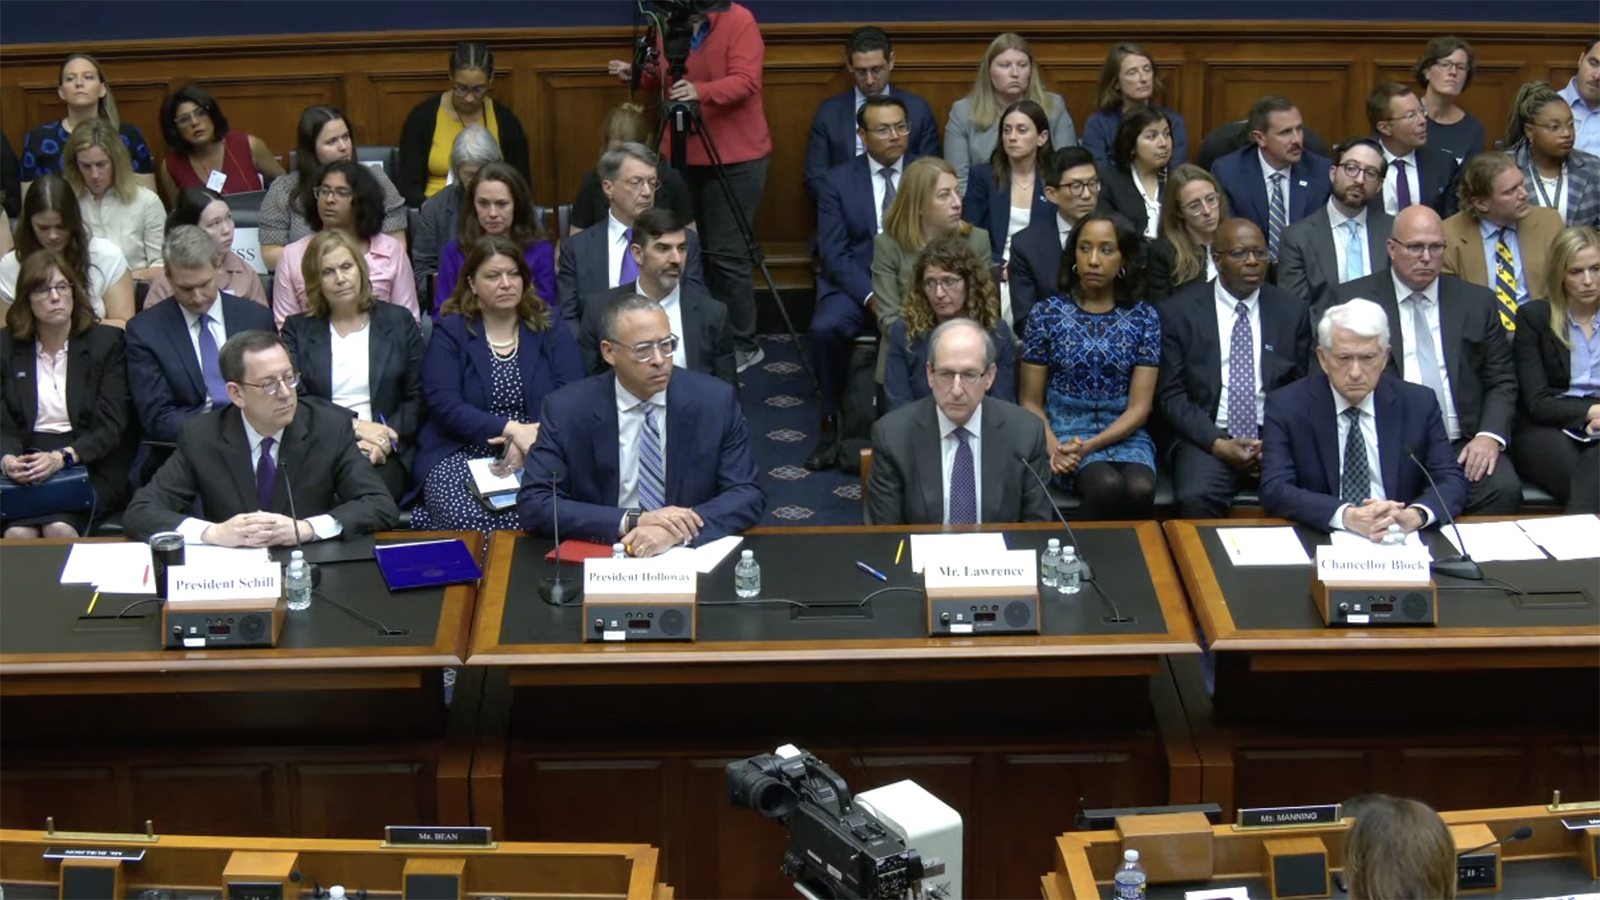 L to R: Northwestern University President Mr. Michael Schill, Rutgers University President Dr. Jonathan Holloway, Mr. Frederick M. Lawrence, Secretary and CEO, The Phi Beta Kappa Society, and Dr. Gene Block, Chancellor, University of California, Los Angeles, are testifying before the House Education Committee today.